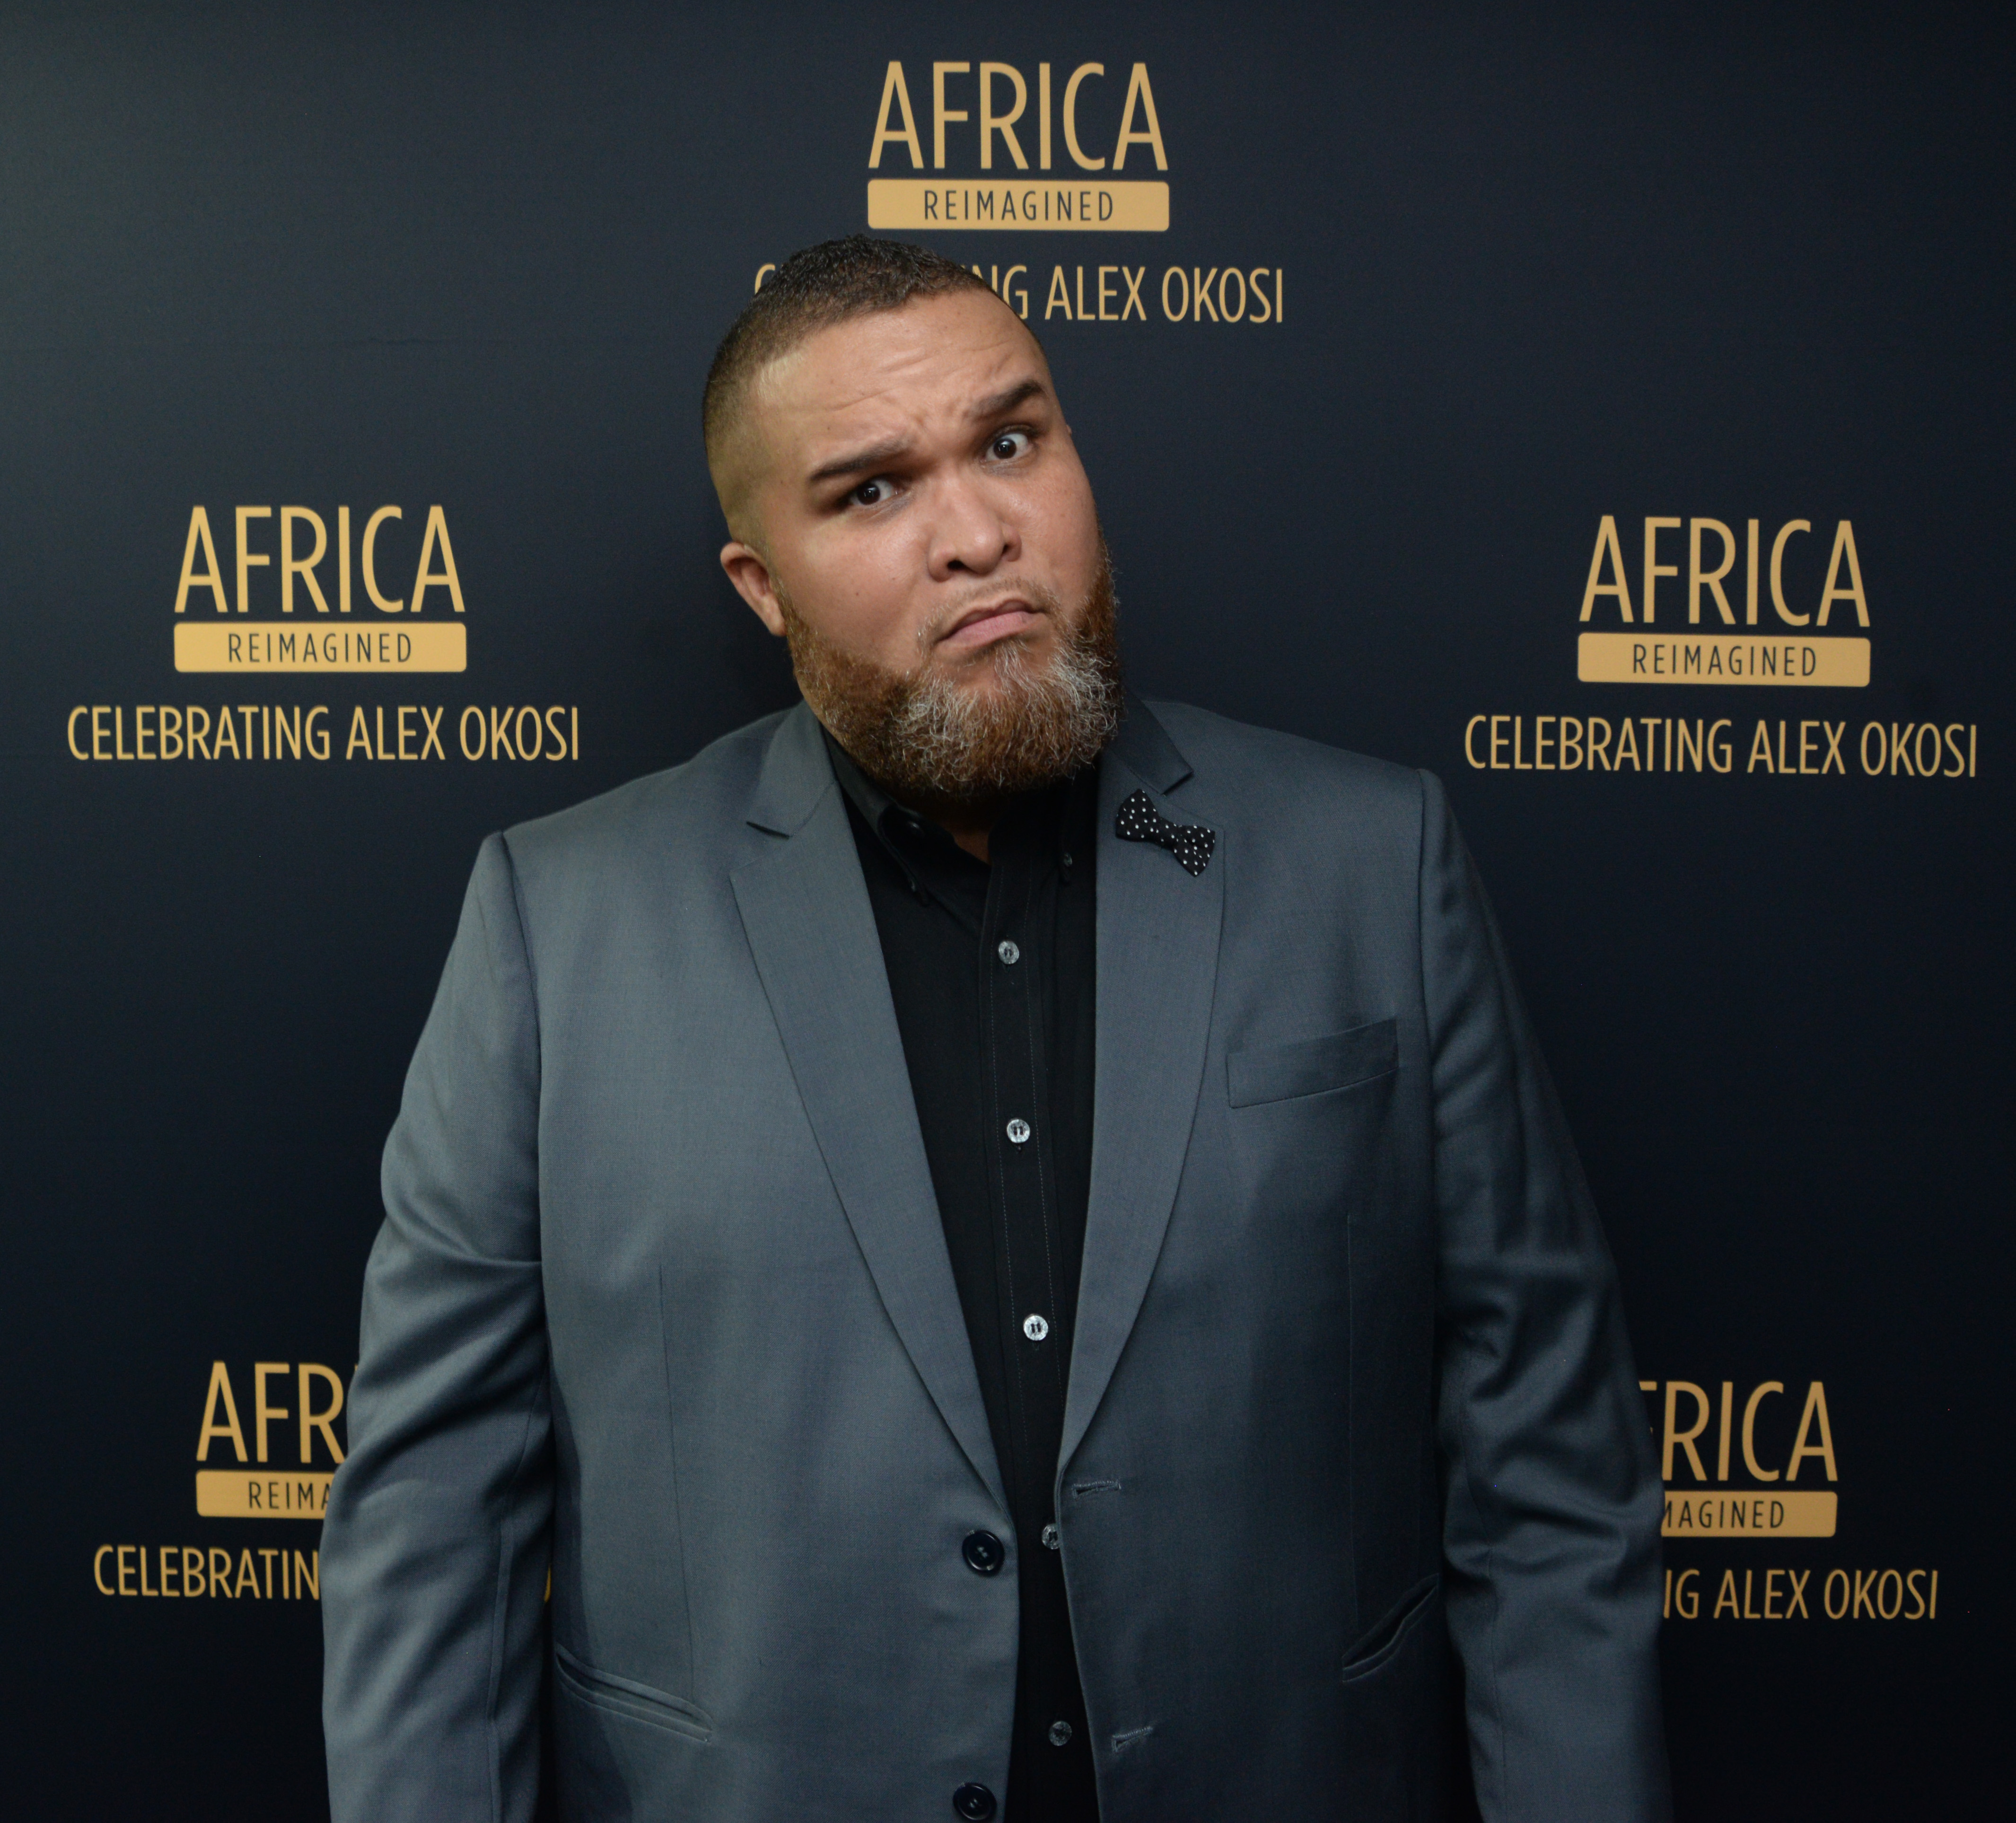 SANDTON, SOUTH AFRICA - FEBRUARY 13: Jason Goliath during the Alex Okosi farewell party at The Park At Hyde Park Corner on February 13, 2020 in Sandton, South Africa. Alex Okosi is a Nigerian born media executive responsible for developing and launching MTV Africa in February 2005. Furthermore, he spearheaded the launch of other localised Viacom brands in Africa. (Photo by Gallo Images/Oupa Bopape)